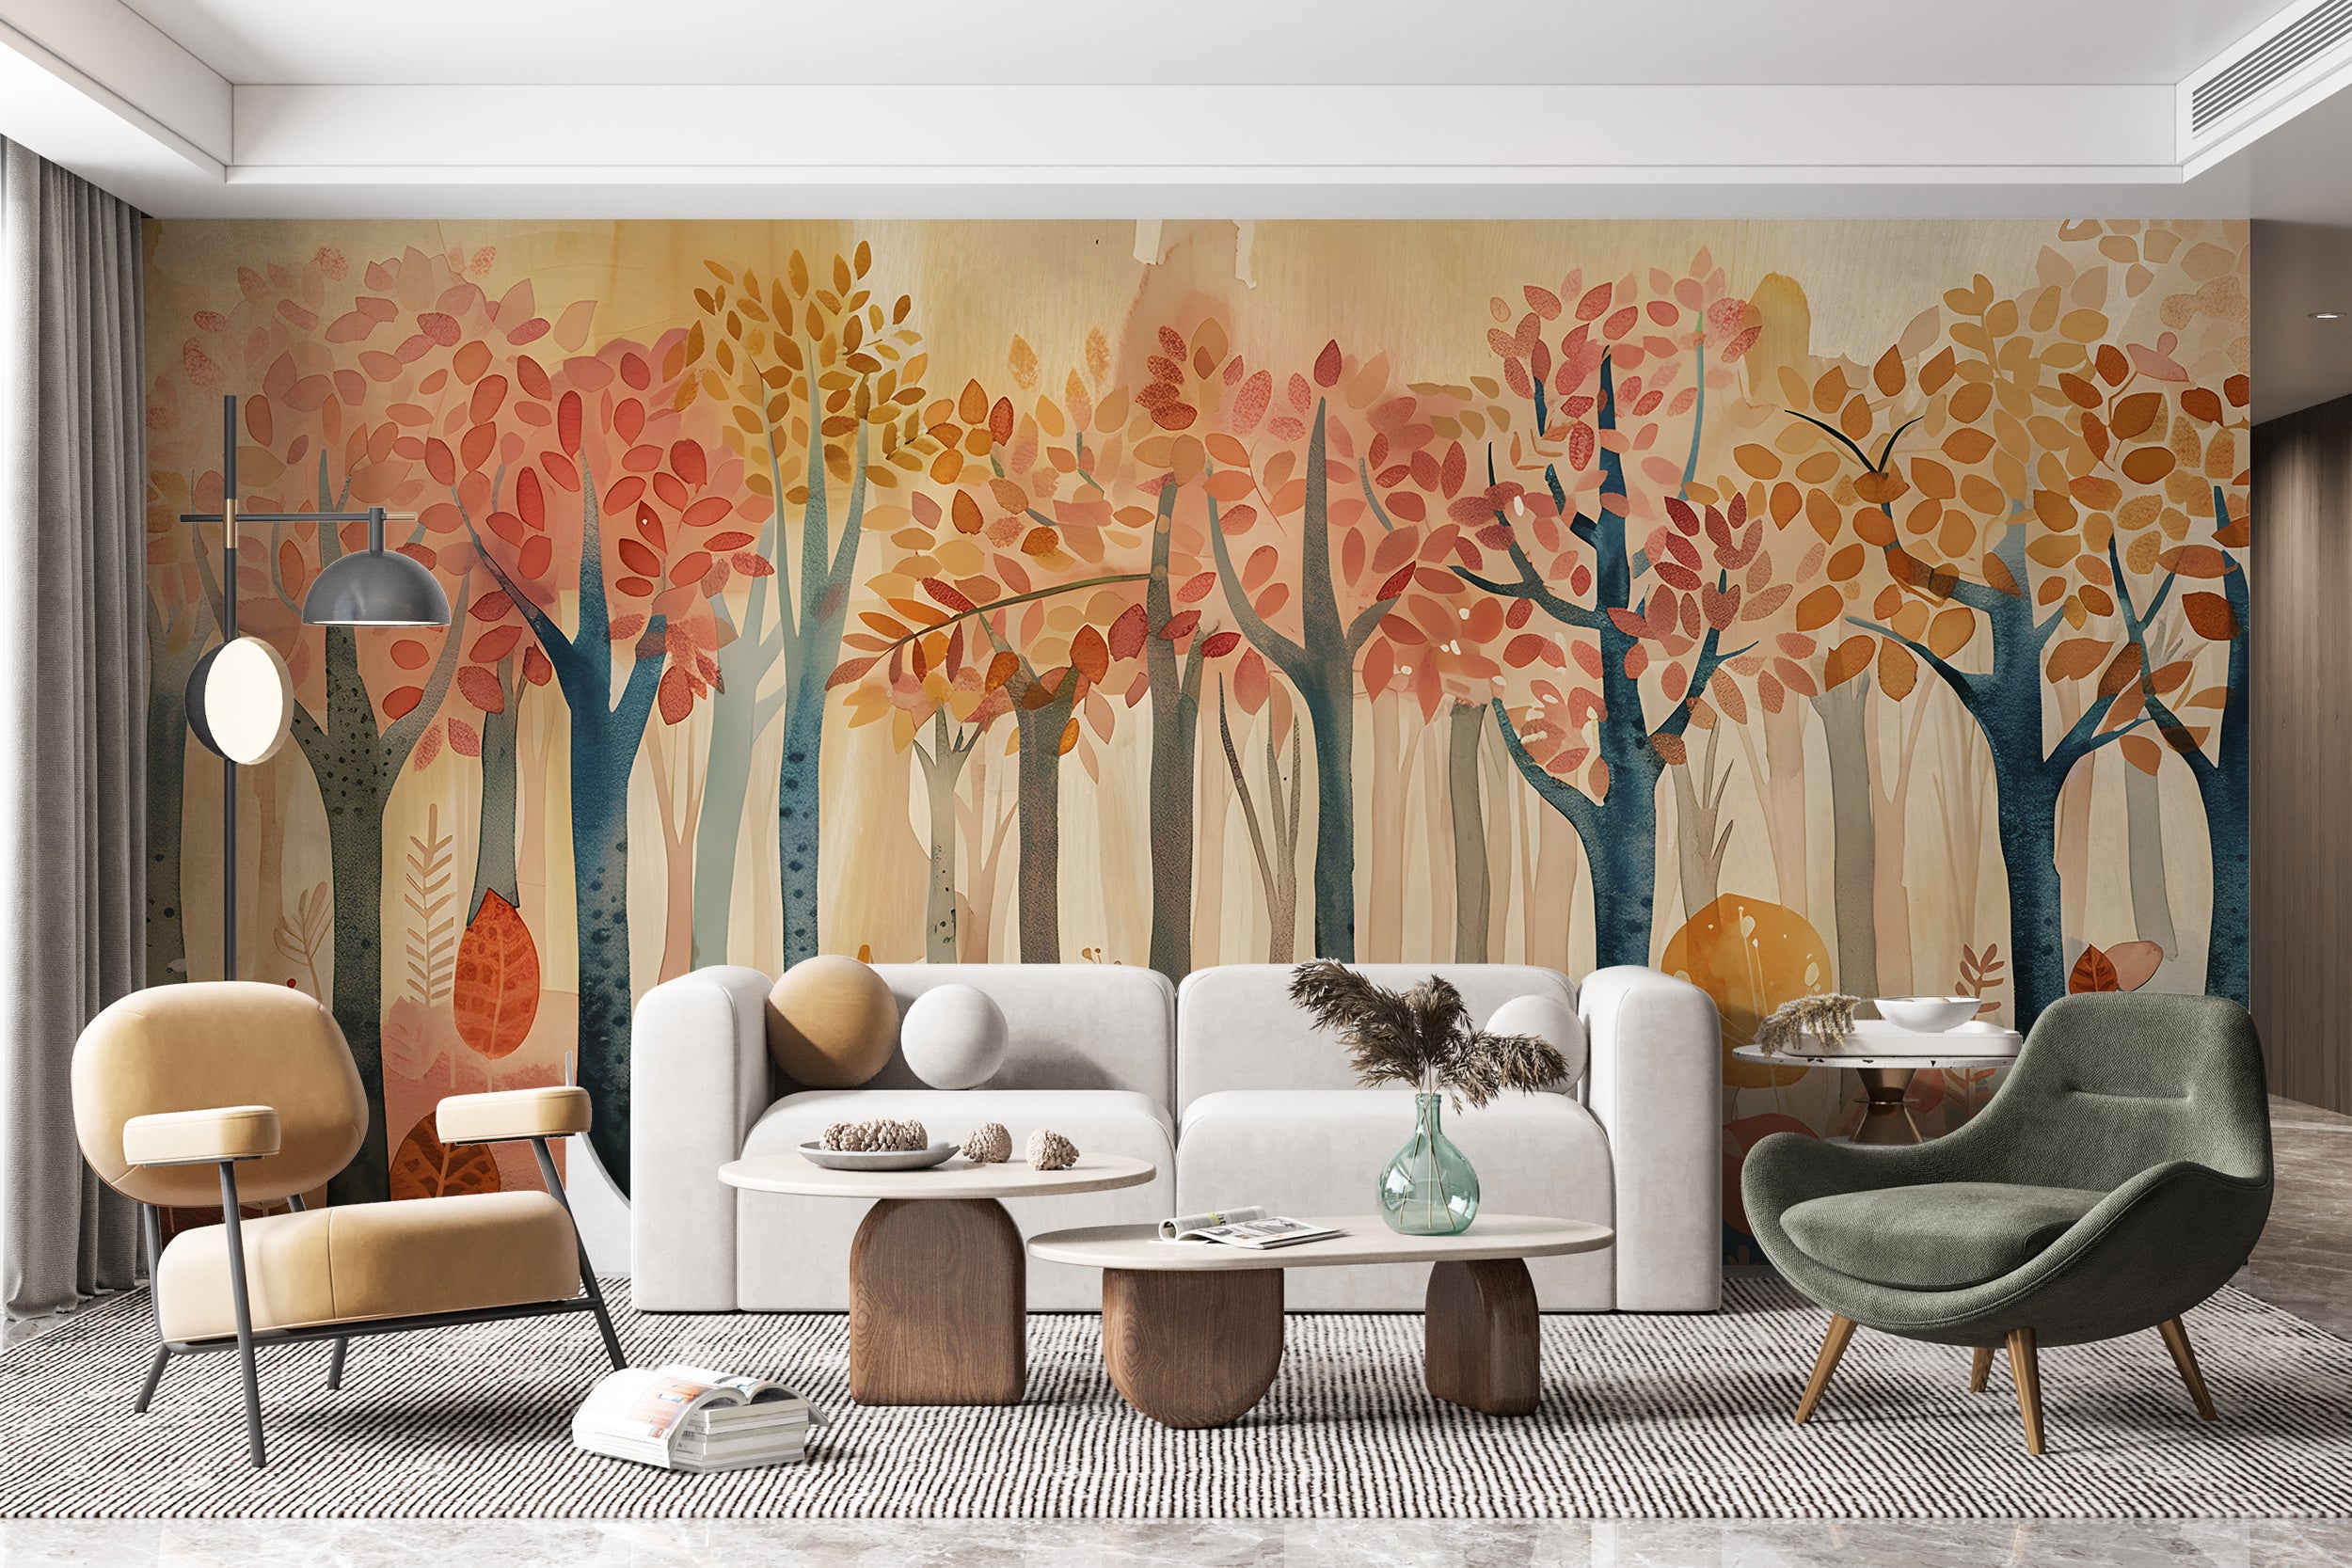 Autumn Forest Mural - Watercolor Nature Wallpaper - Colorful Forest Wall Decal - Peel and Stick Orange Trees Mural - Nursery PVC free